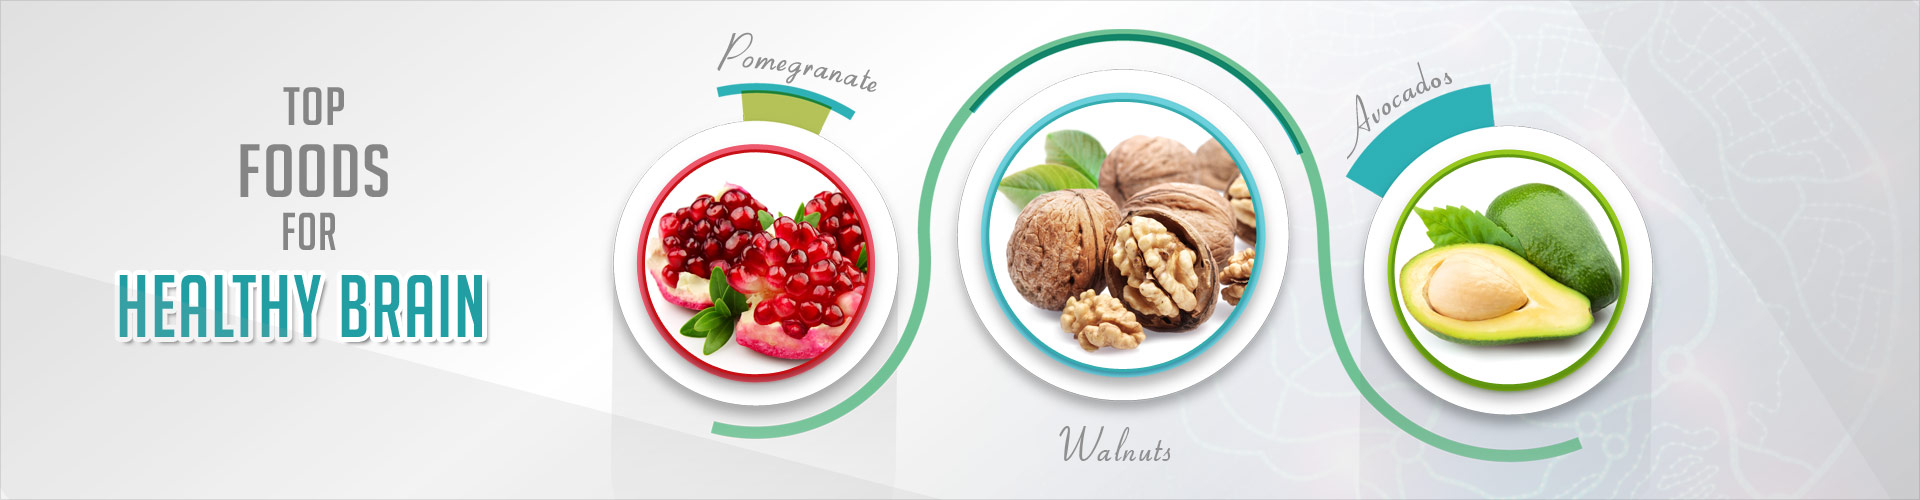 Top Foods for a Healthy Brain - Pomegranate Walnuts Avacados
